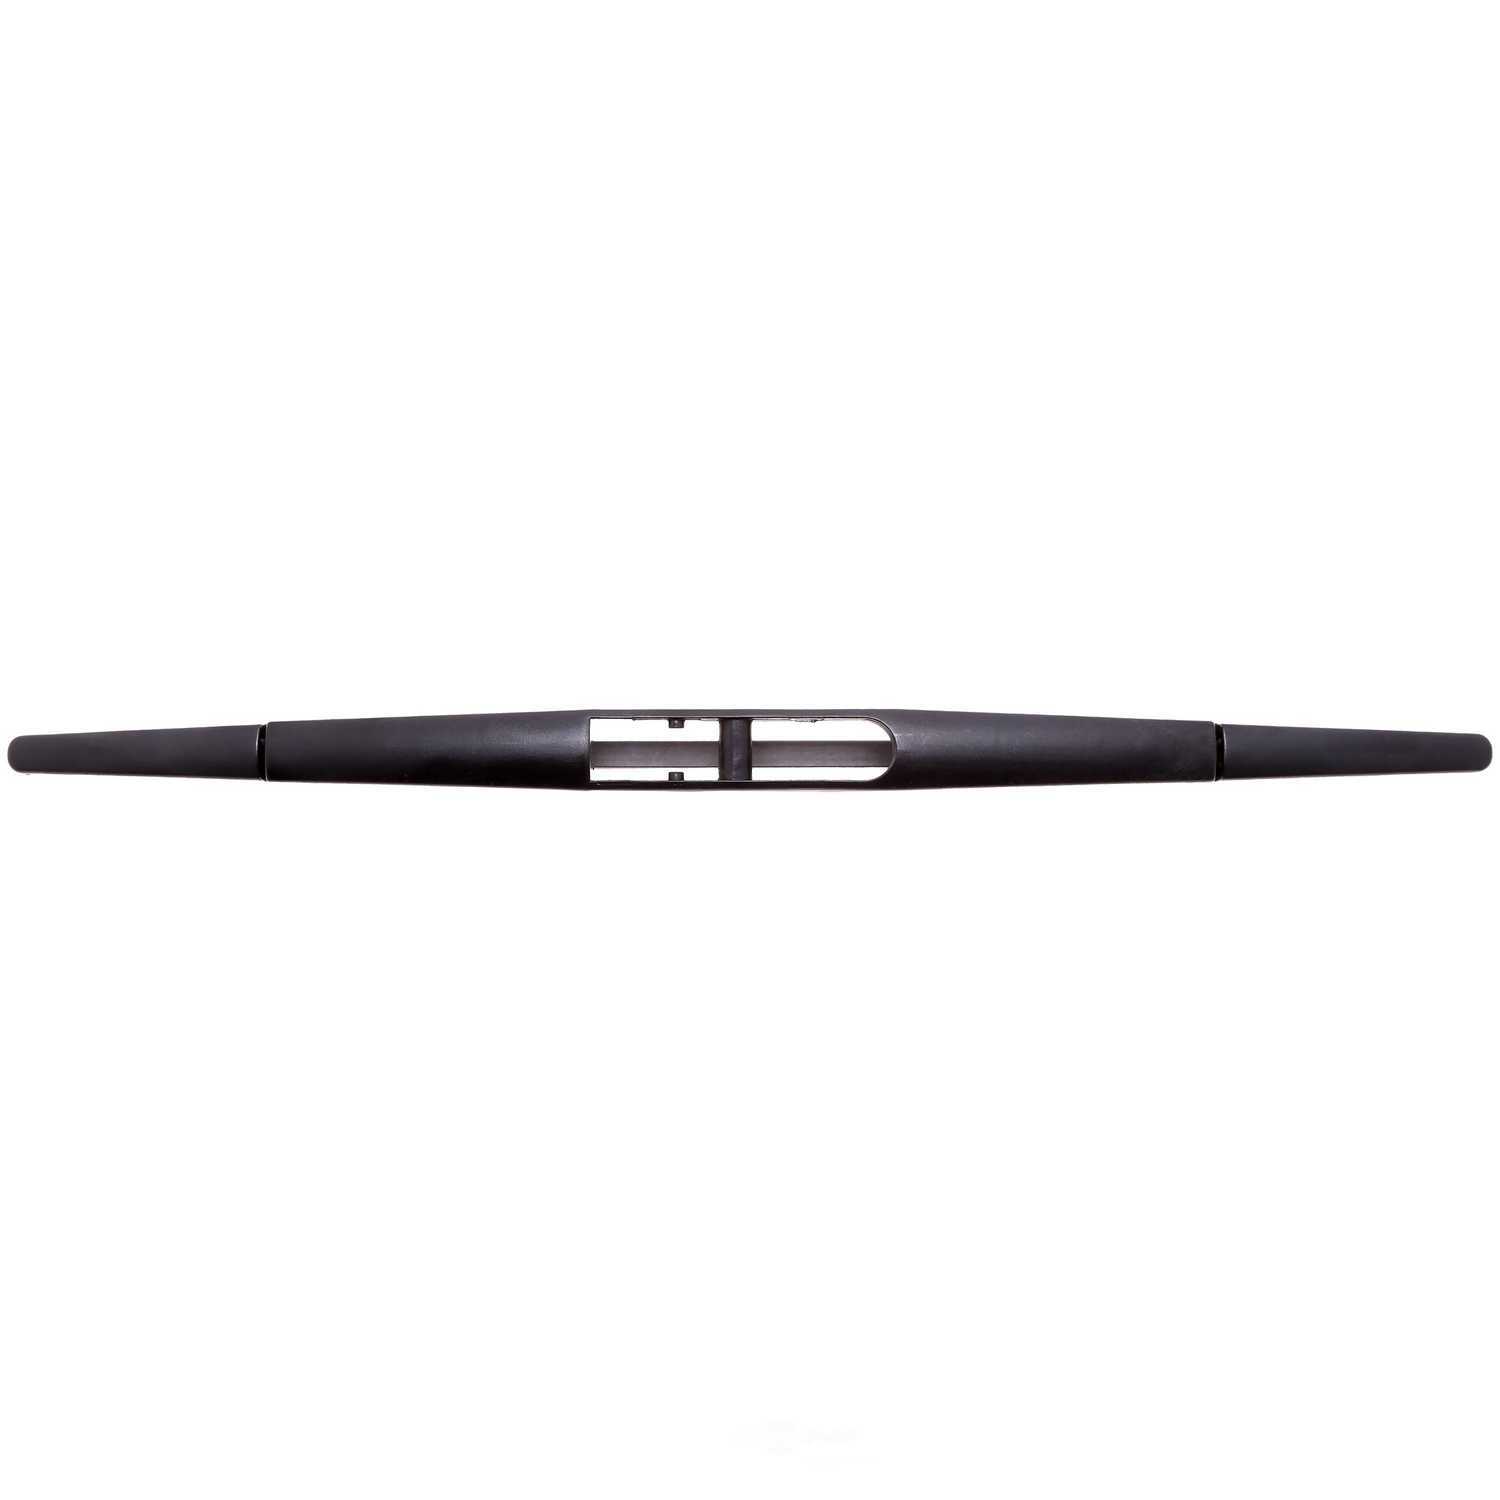 ACDELCO GOLD/PROFESSIONAL - Performance Windshield Wiper Blade (Rear) - DCC 8-212B